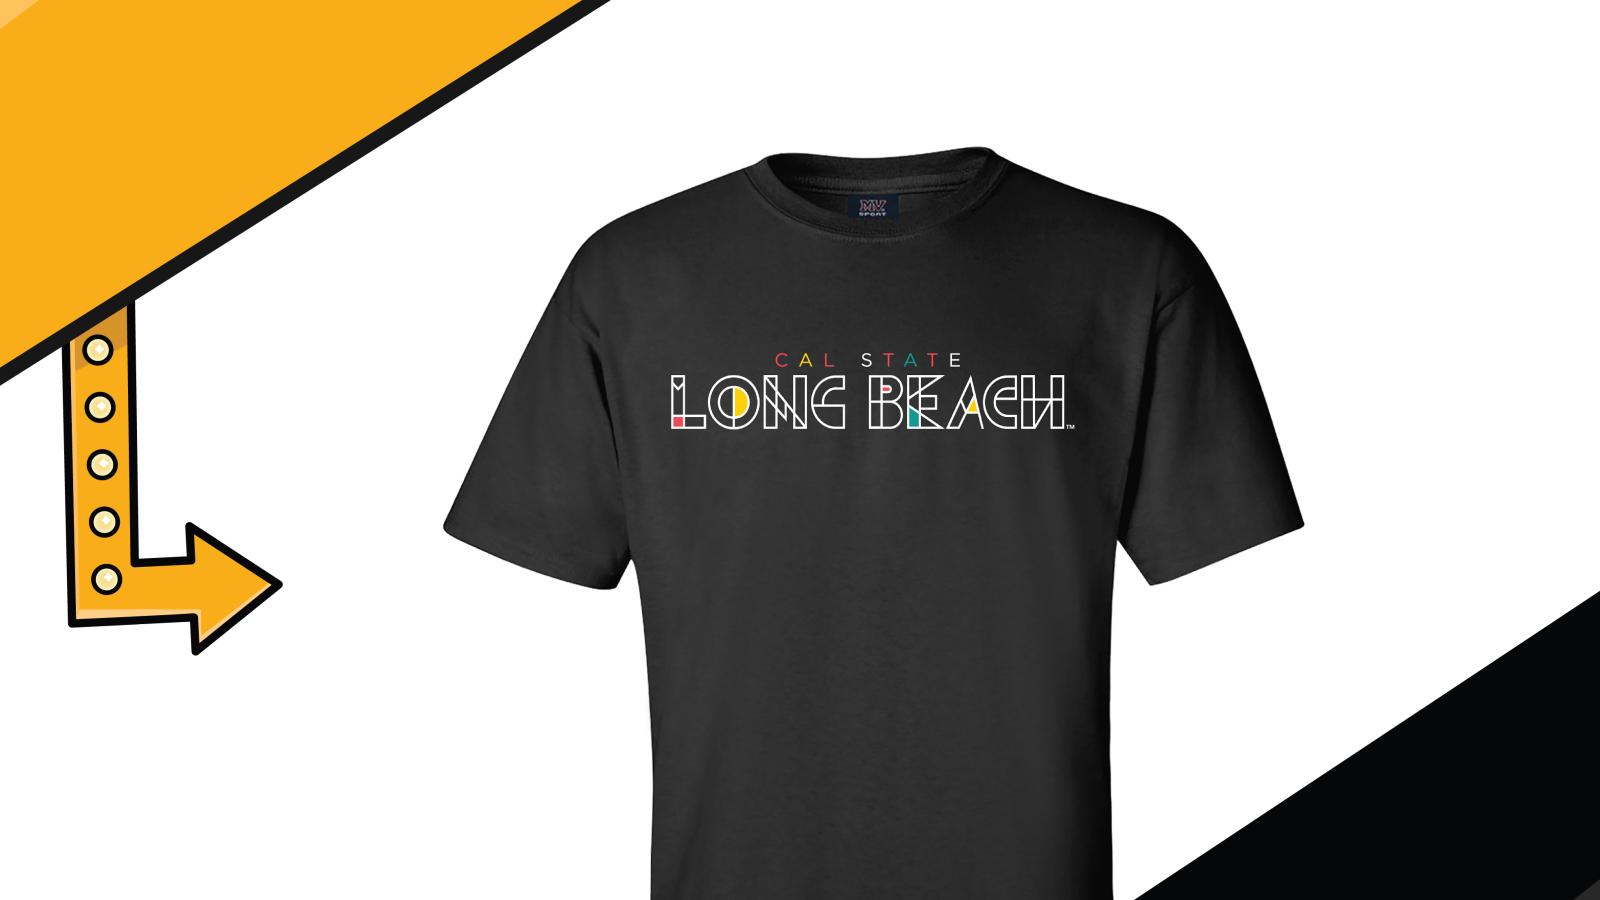 Cal State Long Beach on a shirt using geometric lines to create the letters. 